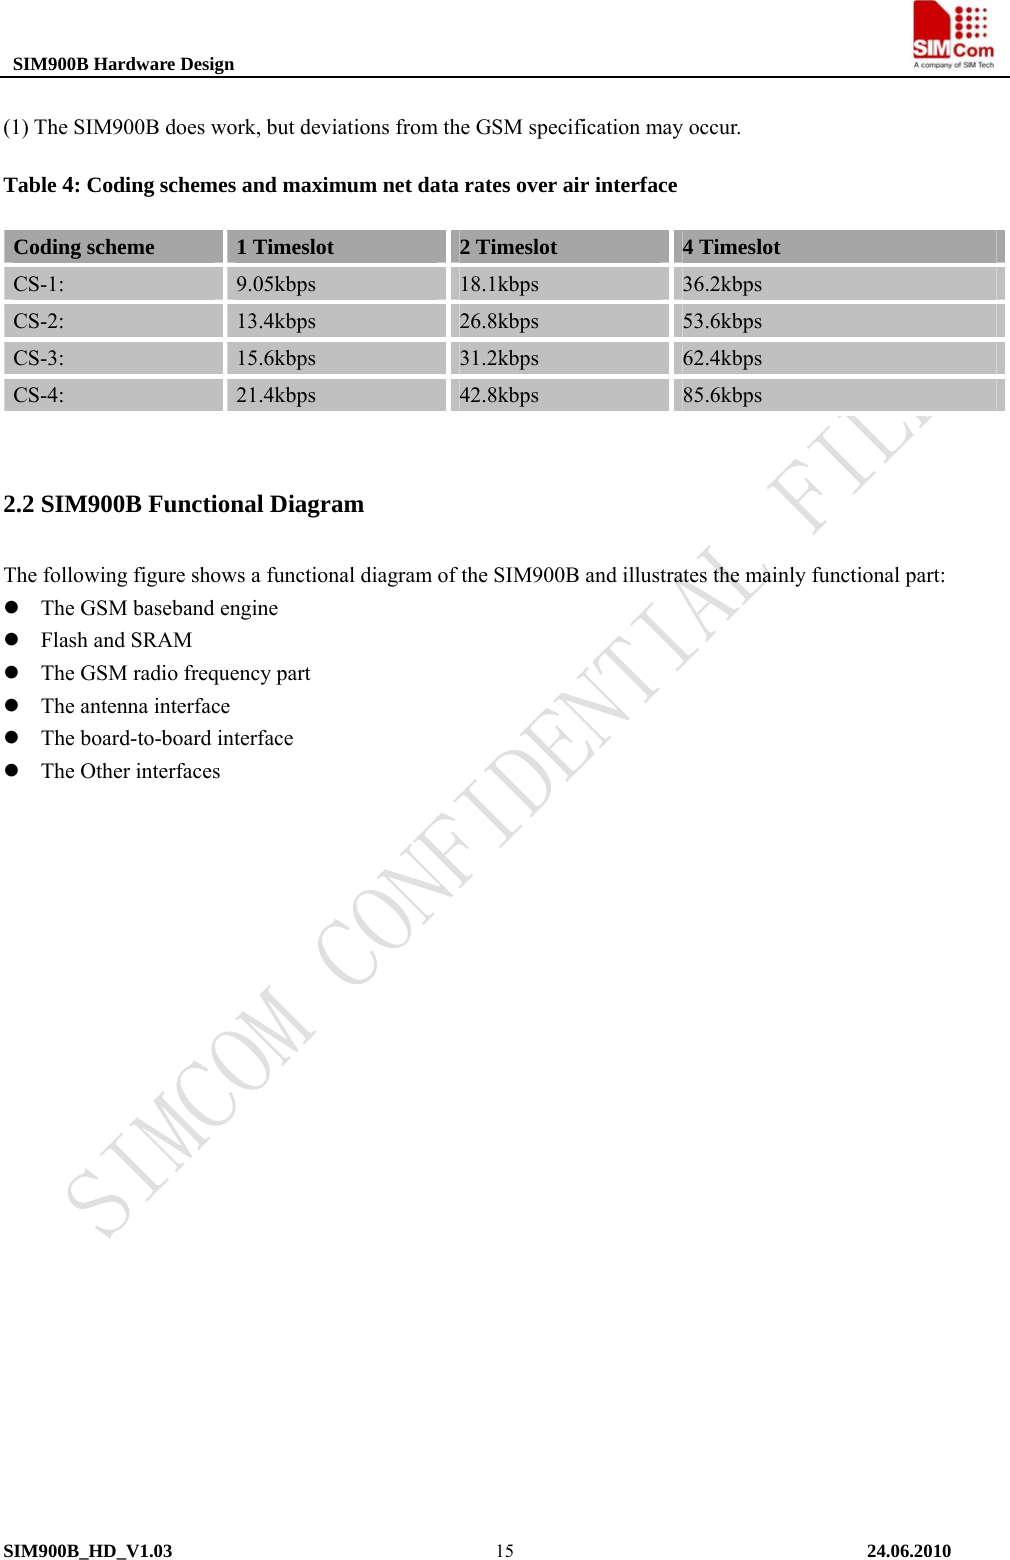  SIM900B Hardware Design                                                                           (1) The SIM900B does work, but deviations from the GSM specification may occur.   Table 4: Coding schemes and maximum net data rates over air interface Coding scheme 1 Timeslot  2 Timeslot 4 Timeslot CS-1:  9.05kbps  18.1kbps  36.2kbps CS-2:  13.4kbps  26.8kbps  53.6kbps CS-3:  15.6kbps  31.2kbps  62.4kbps CS-4:  21.4kbps  42.8kbps  85.6kbps  2.2 SIM900B Functional Diagram The following figure shows a functional diagram of the SIM900B and illustrates the mainly functional part: z The GSM baseband engine z Flash and SRAM z The GSM radio frequency part z The antenna interface z The board-to-board interface z The Other interfaces  SIM900B_HD_V1.03                                                                          24.06.2010  15